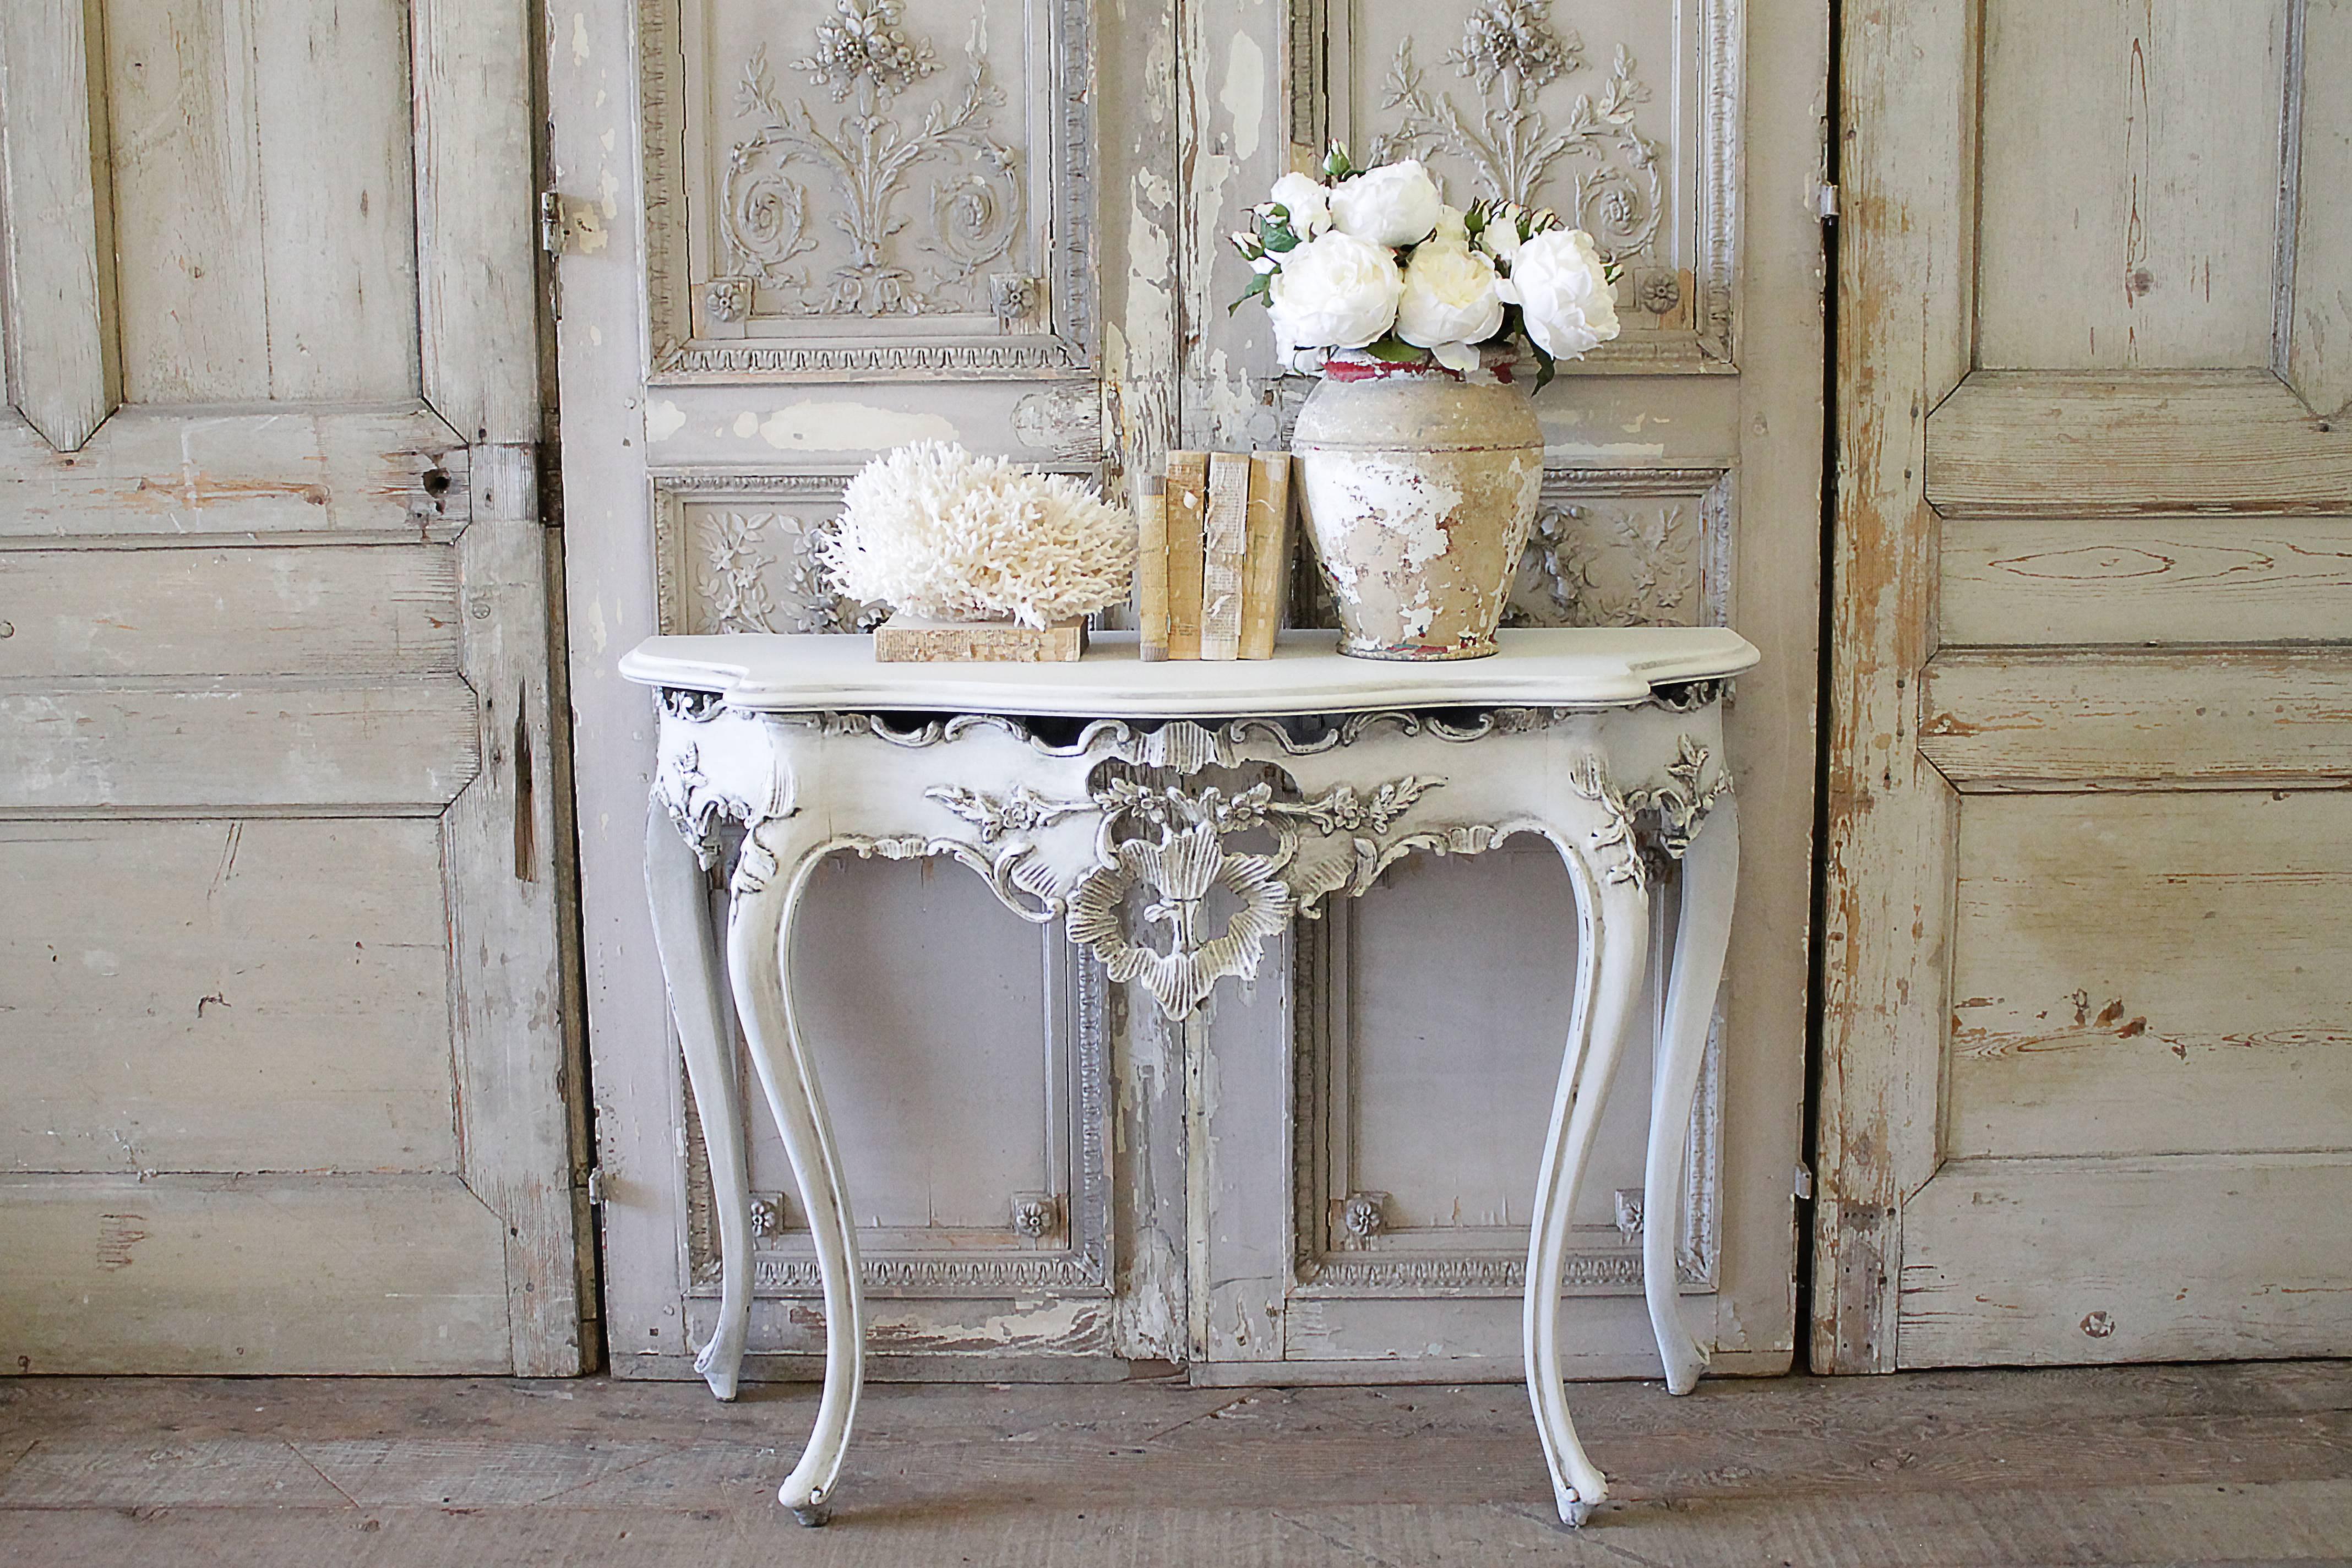 Painted in a soft oyster white with hand glazed finish. Gilt finish peeking through the paint on areas where there is distressing. Louis XV style with carved decorative details, and Classic curved legs.
Measures: 45